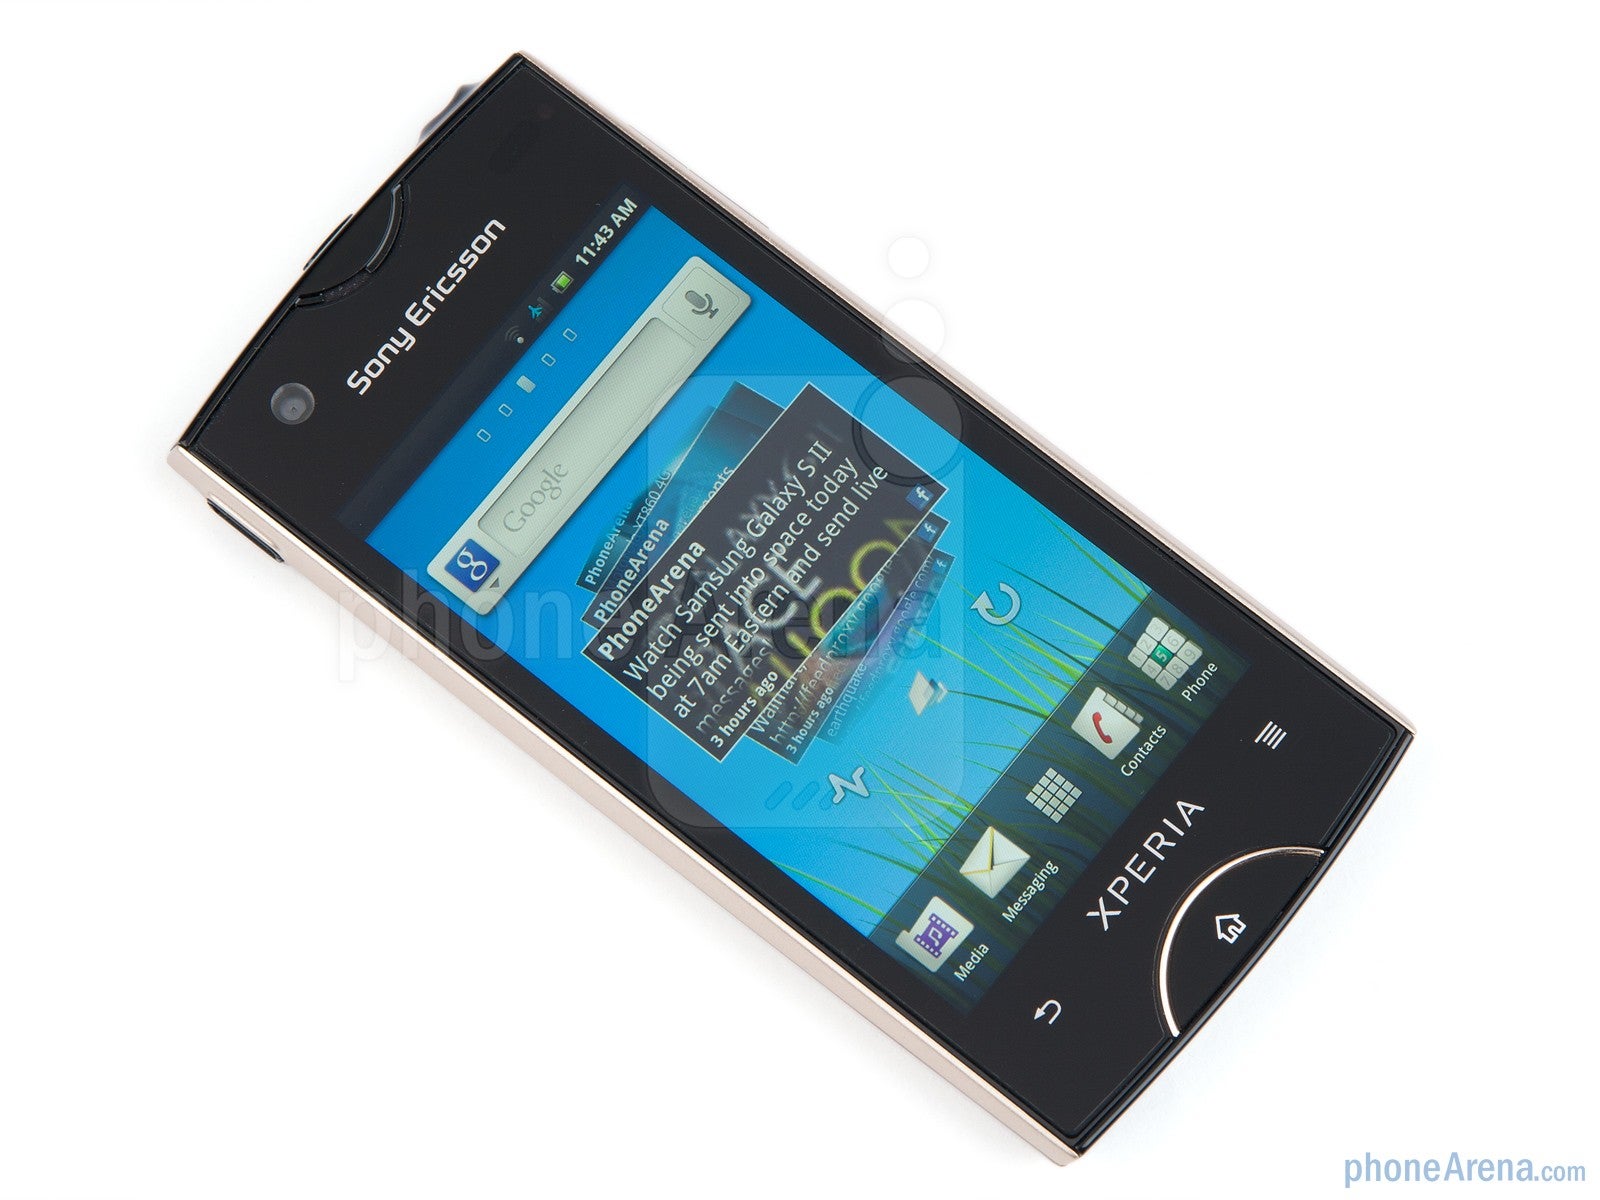 The 3.3 inches LCD display - Sony Ericsson Xperia ray Review